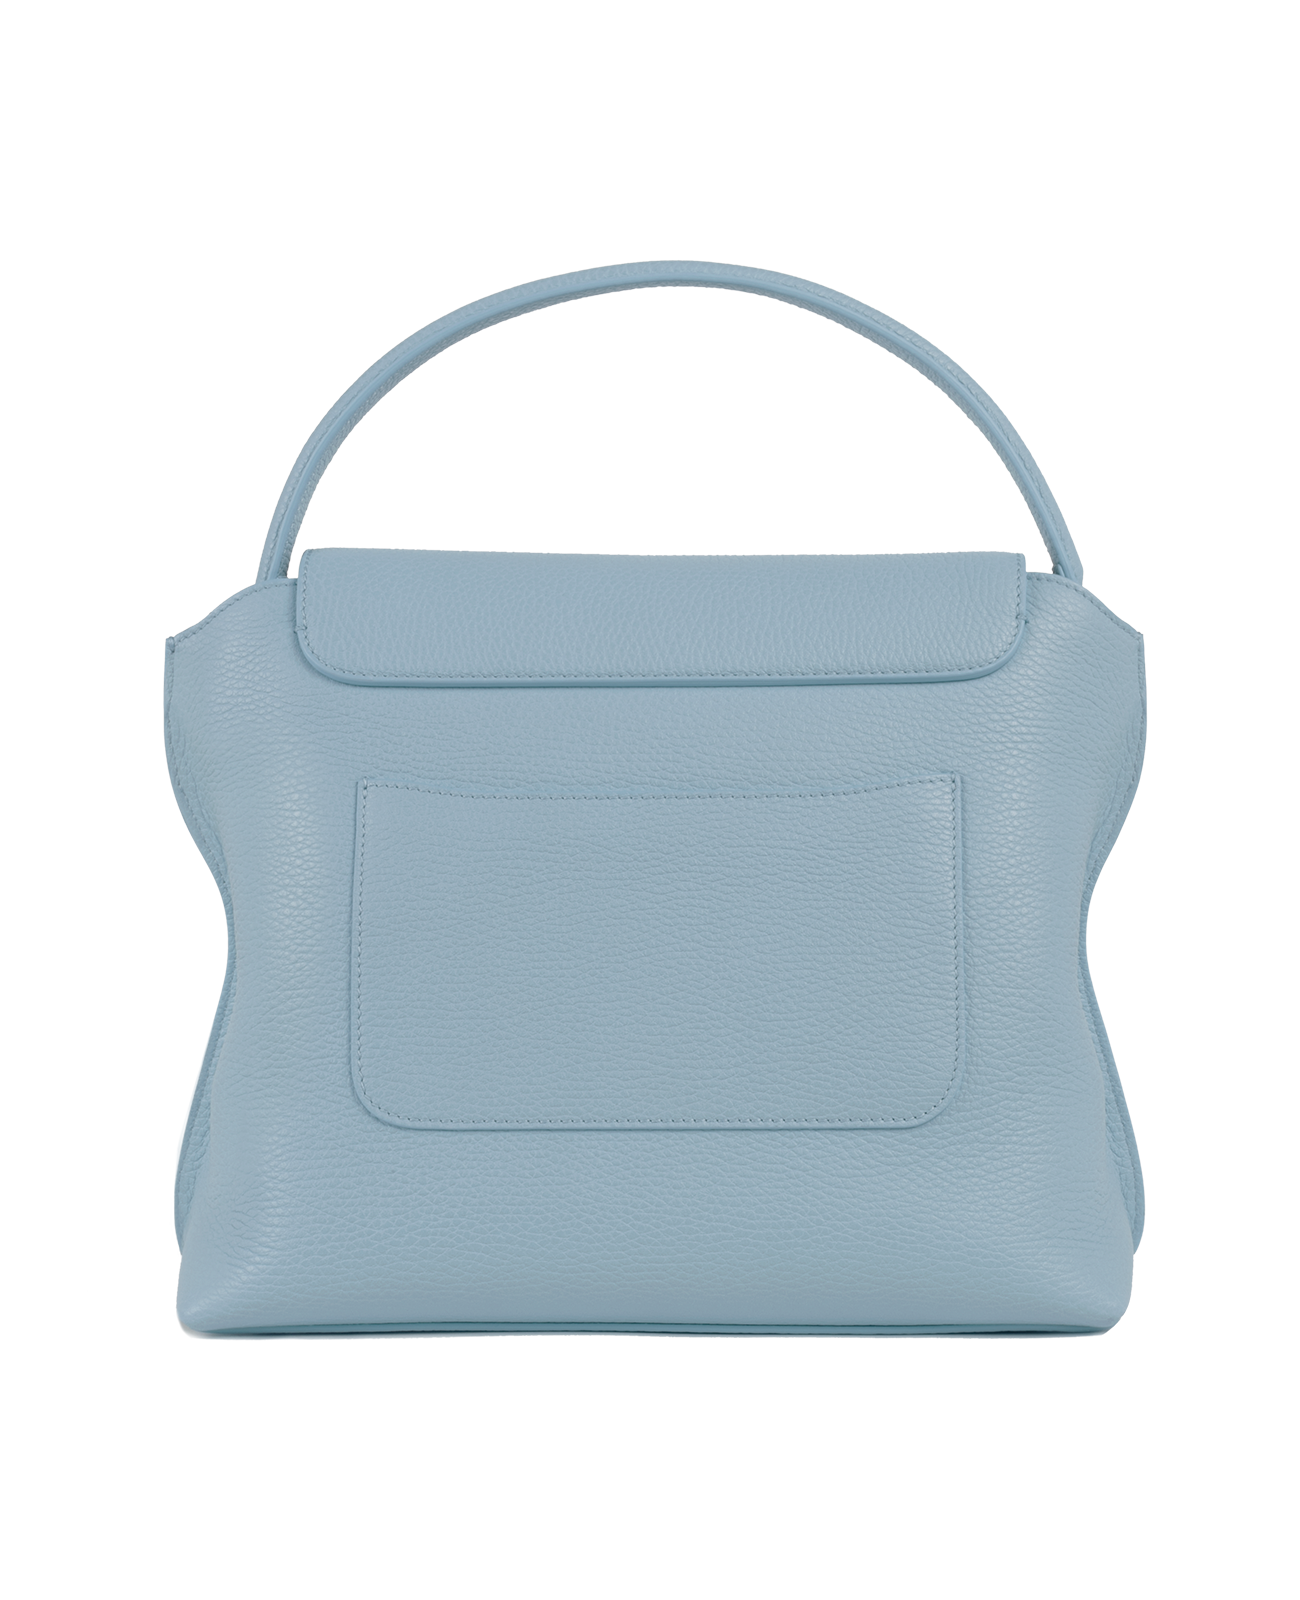 Cross-body bag in Italian full-grain leather, semi-aniline calf Italian leather with detachable shoulder strap.Three compartments, zip pocket in the back compartment. Magnetic flap closure with logo. Color: Baby Blue. Size:Large